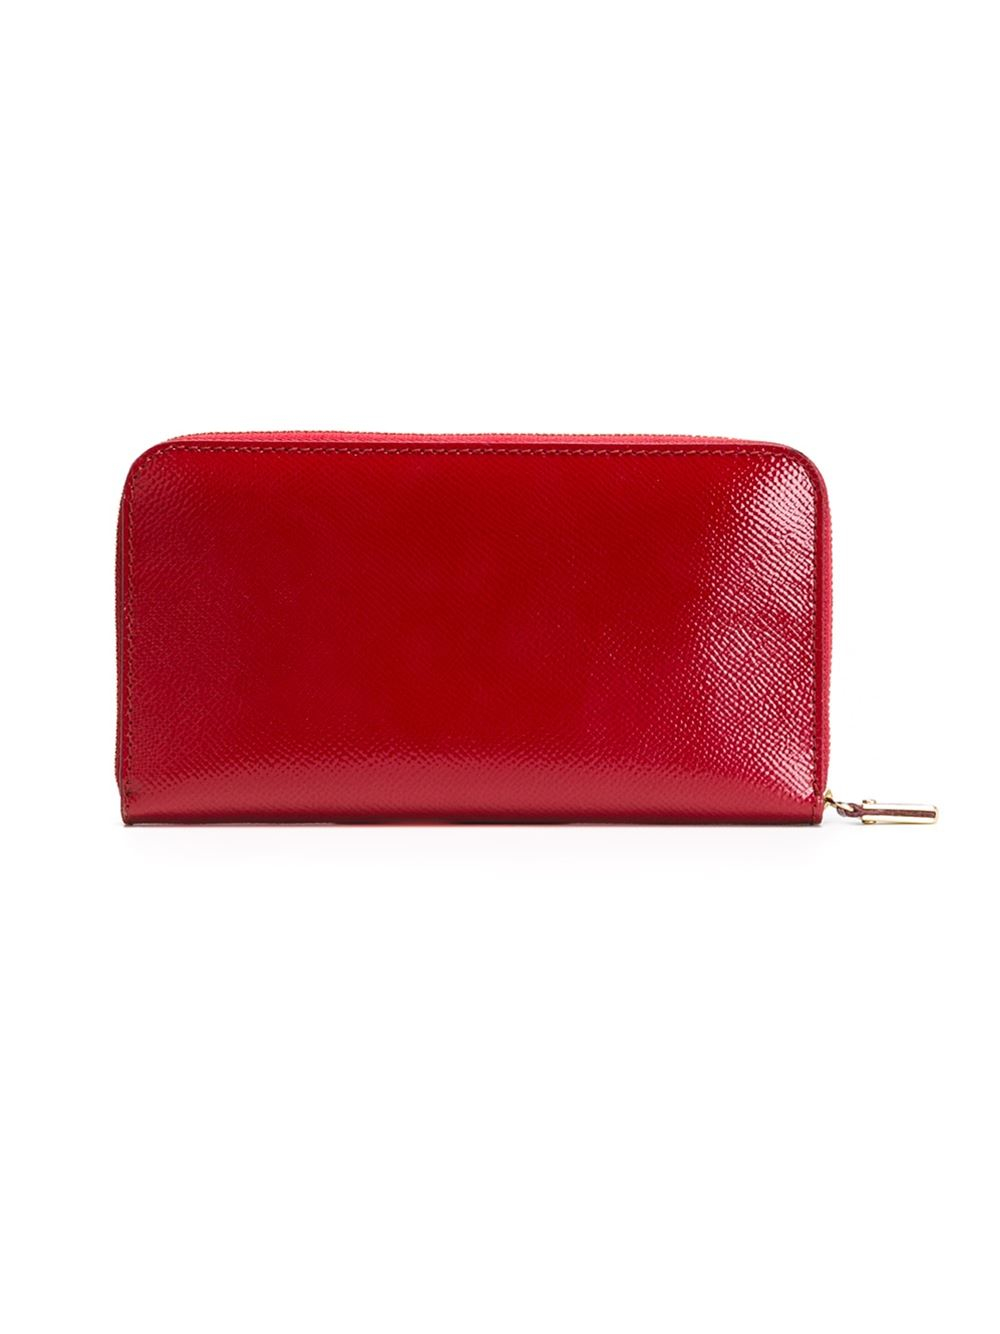 London Leather Wallets | IUCN Water